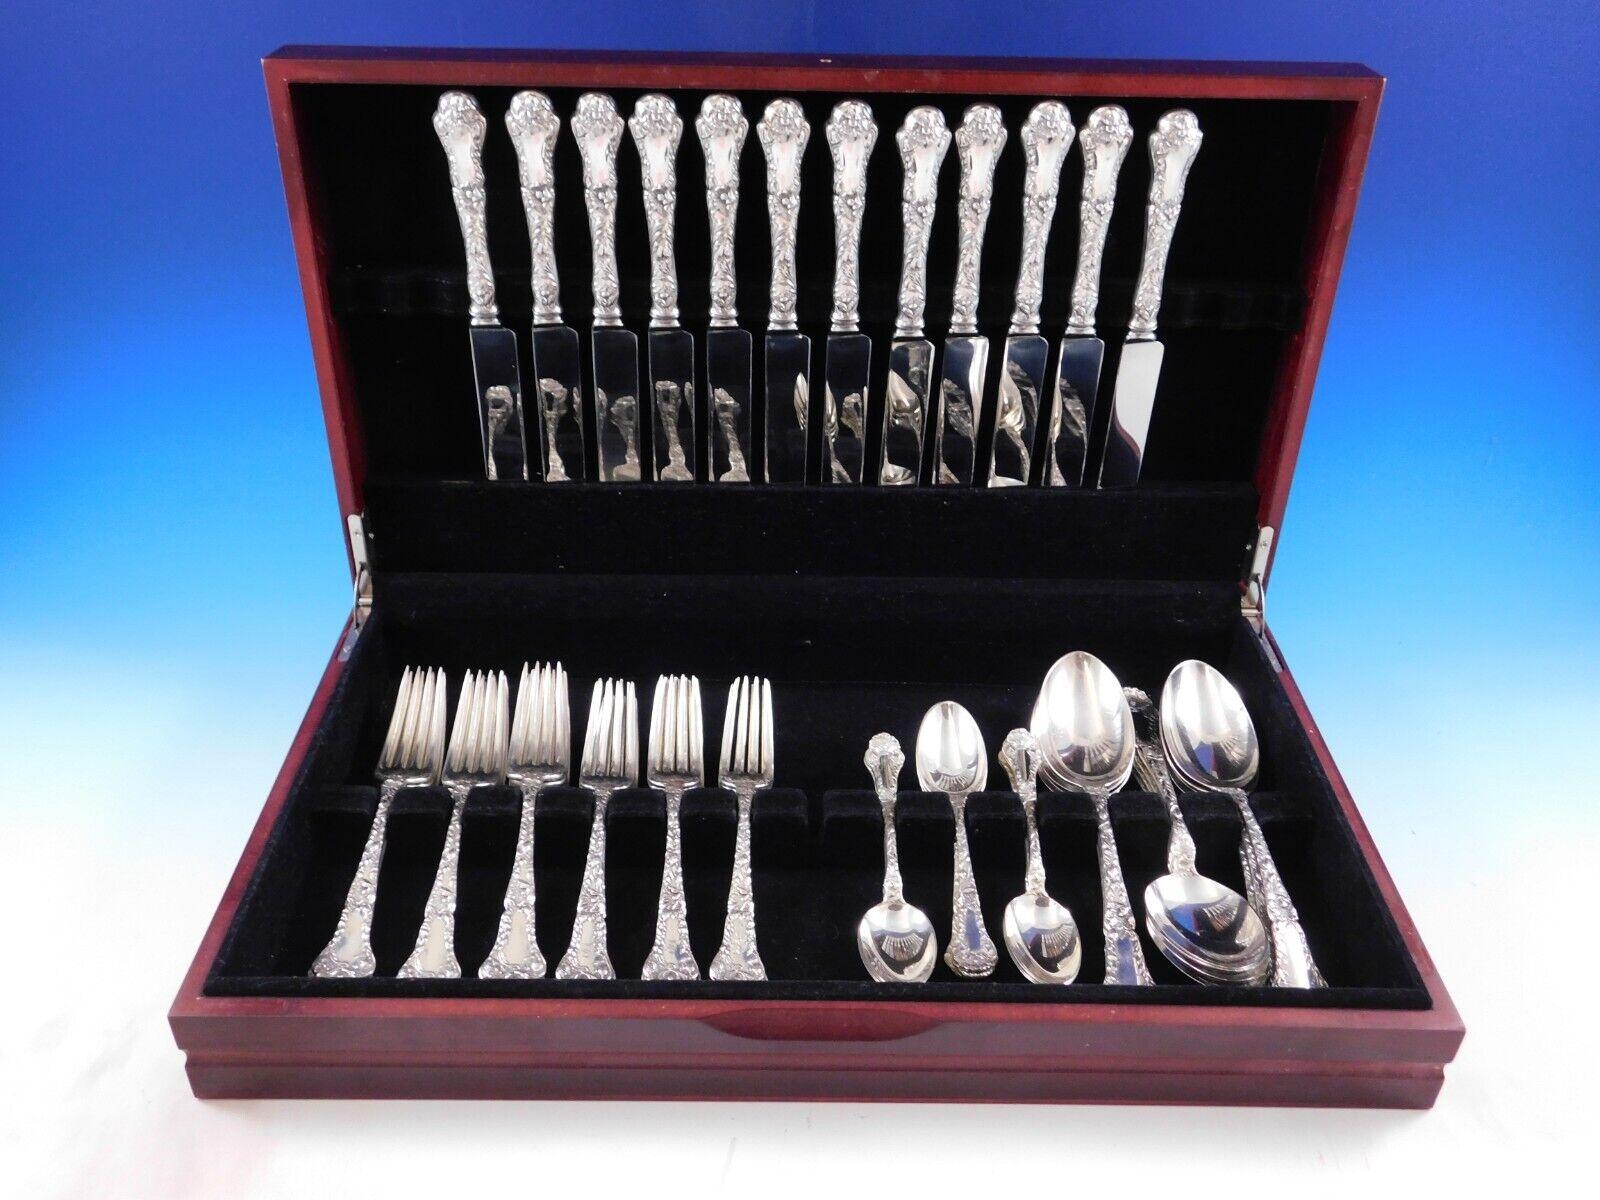 Exquisite dinner size Poppy by Gorham sterling silver flatware set - 60 pieces. This set includes:
12 Dinner Size Knives, 9 5/8